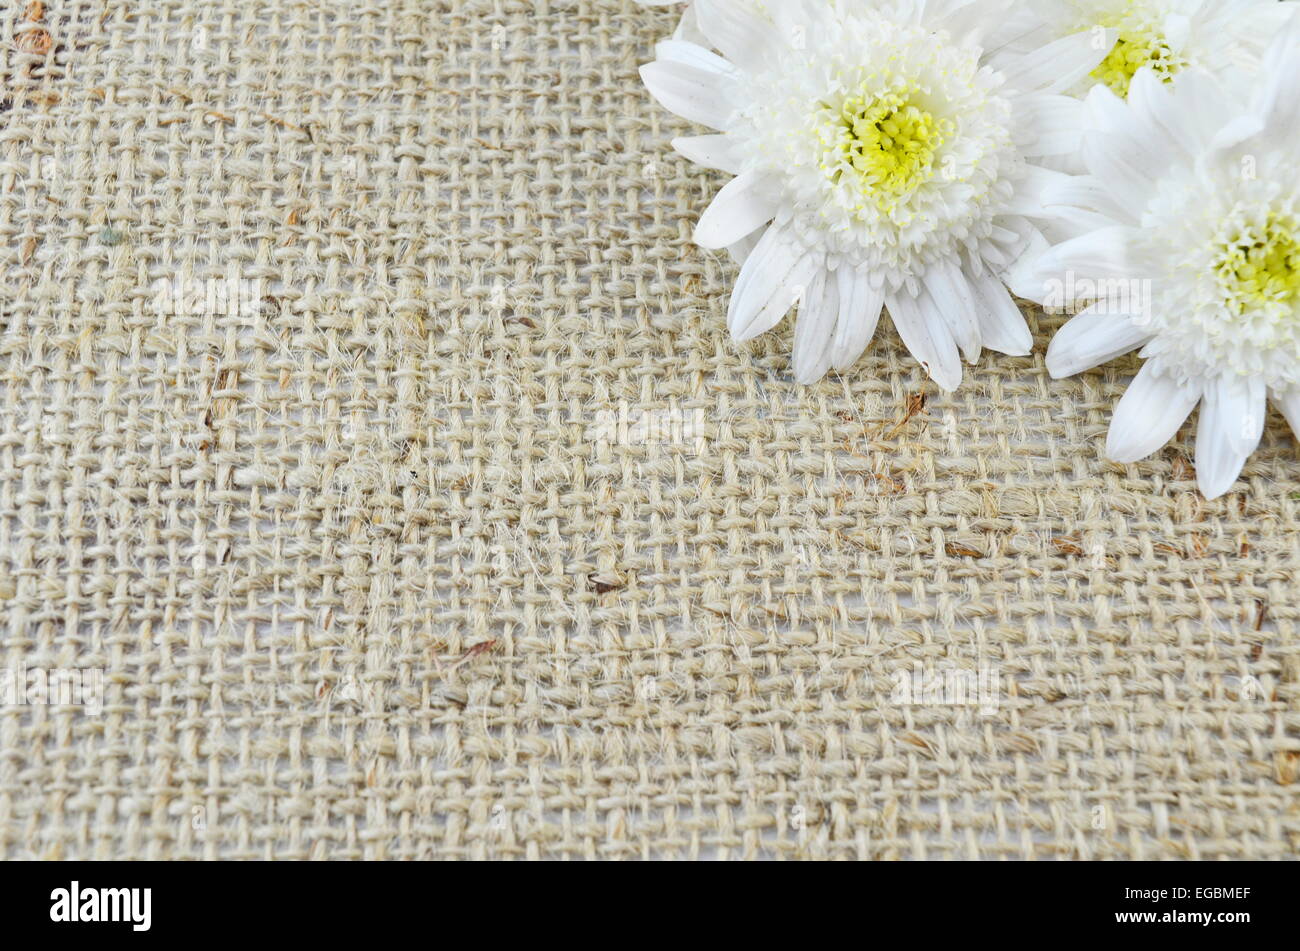 Chrysanthemum on a special knitted table cloth Stock Photo